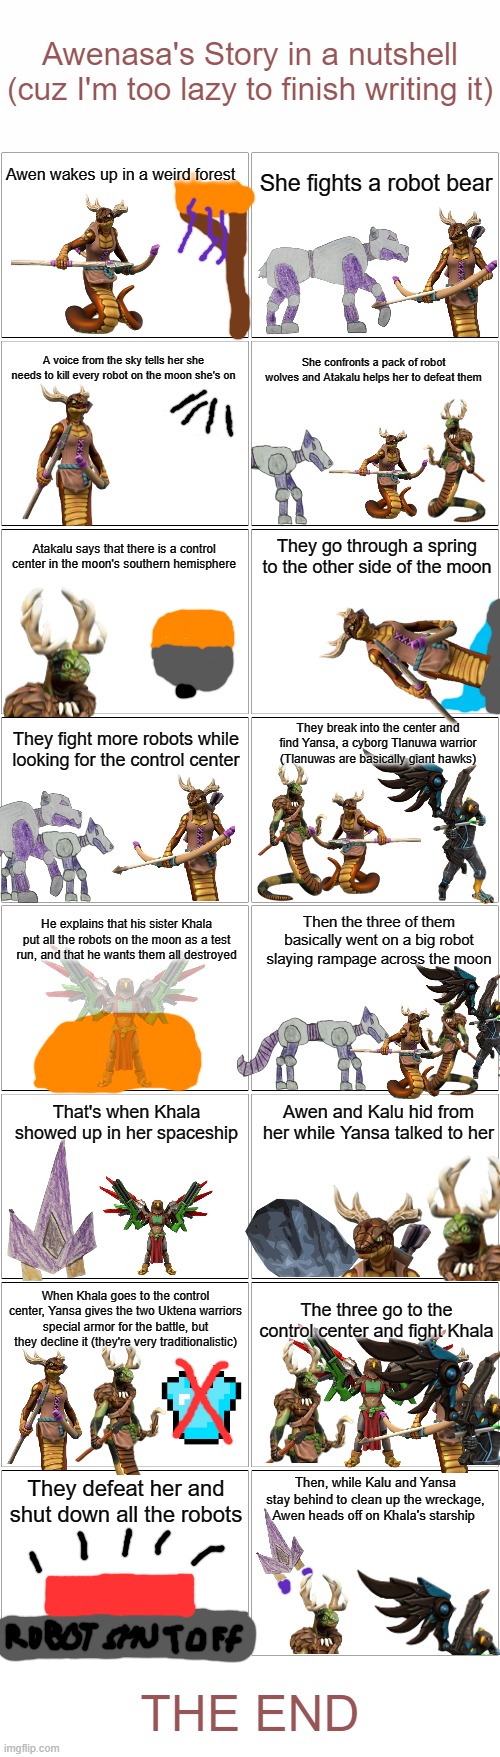 Literally all of Awenasa's lore in one comic (please don't ask me how long it took to make this) | Awenasa's Story in a nutshell
(cuz I'm too lazy to finish writing it); Awen wakes up in a weird forest; She fights a robot bear; A voice from the sky tells her she needs to kill every robot on the moon she's on; She confronts a pack of robot wolves and Atakalu helps her to defeat them; Atakalu says that there is a control center in the moon's southern hemisphere; They go through a spring to the other side of the moon; They fight more robots while looking for the control center; They break into the center and find Yansa, a cyborg Tlanuwa warrior
(Tlanuwas are basically giant hawks); He explains that his sister Khala put all the robots on the moon as a test run, and that he wants them all destroyed; Then the three of them basically went on a big robot slaying rampage across the moon; That's when Khala showed up in her spaceship; Awen and Kalu hid from her while Yansa talked to her; When Khala goes to the control center, Yansa gives the two Uktena warriors special armor for the battle, but they decline it (they're very traditionalistic); The three go to the control center and fight Khala; Then, while Kalu and Yansa stay behind to clean up the wreckage, Awen heads off on Khala's starship; They defeat her and shut down all the robots; THE END | image tagged in blank comic panel 2x8 | made w/ Imgflip meme maker